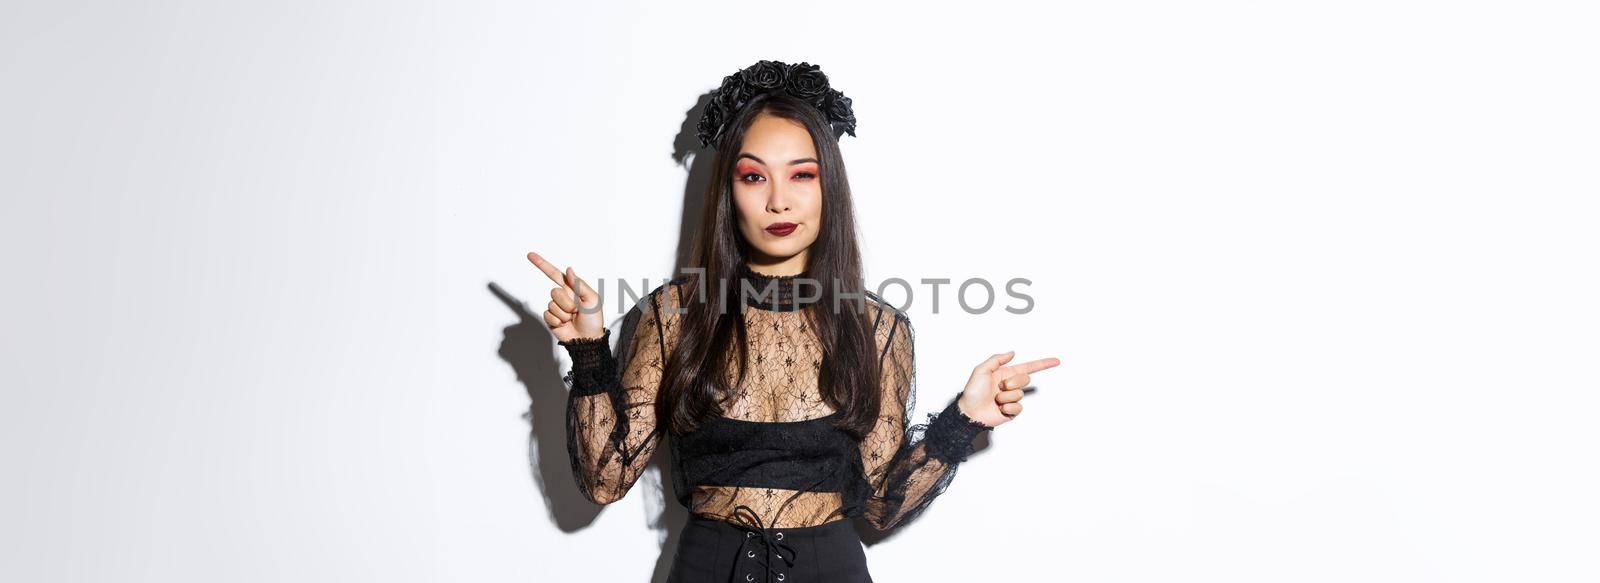 Sassy young evil witch with gothic makeup and wreath, looking arrogant while pointing fingers sideways, showing two halloween themed banners, standing over white background.